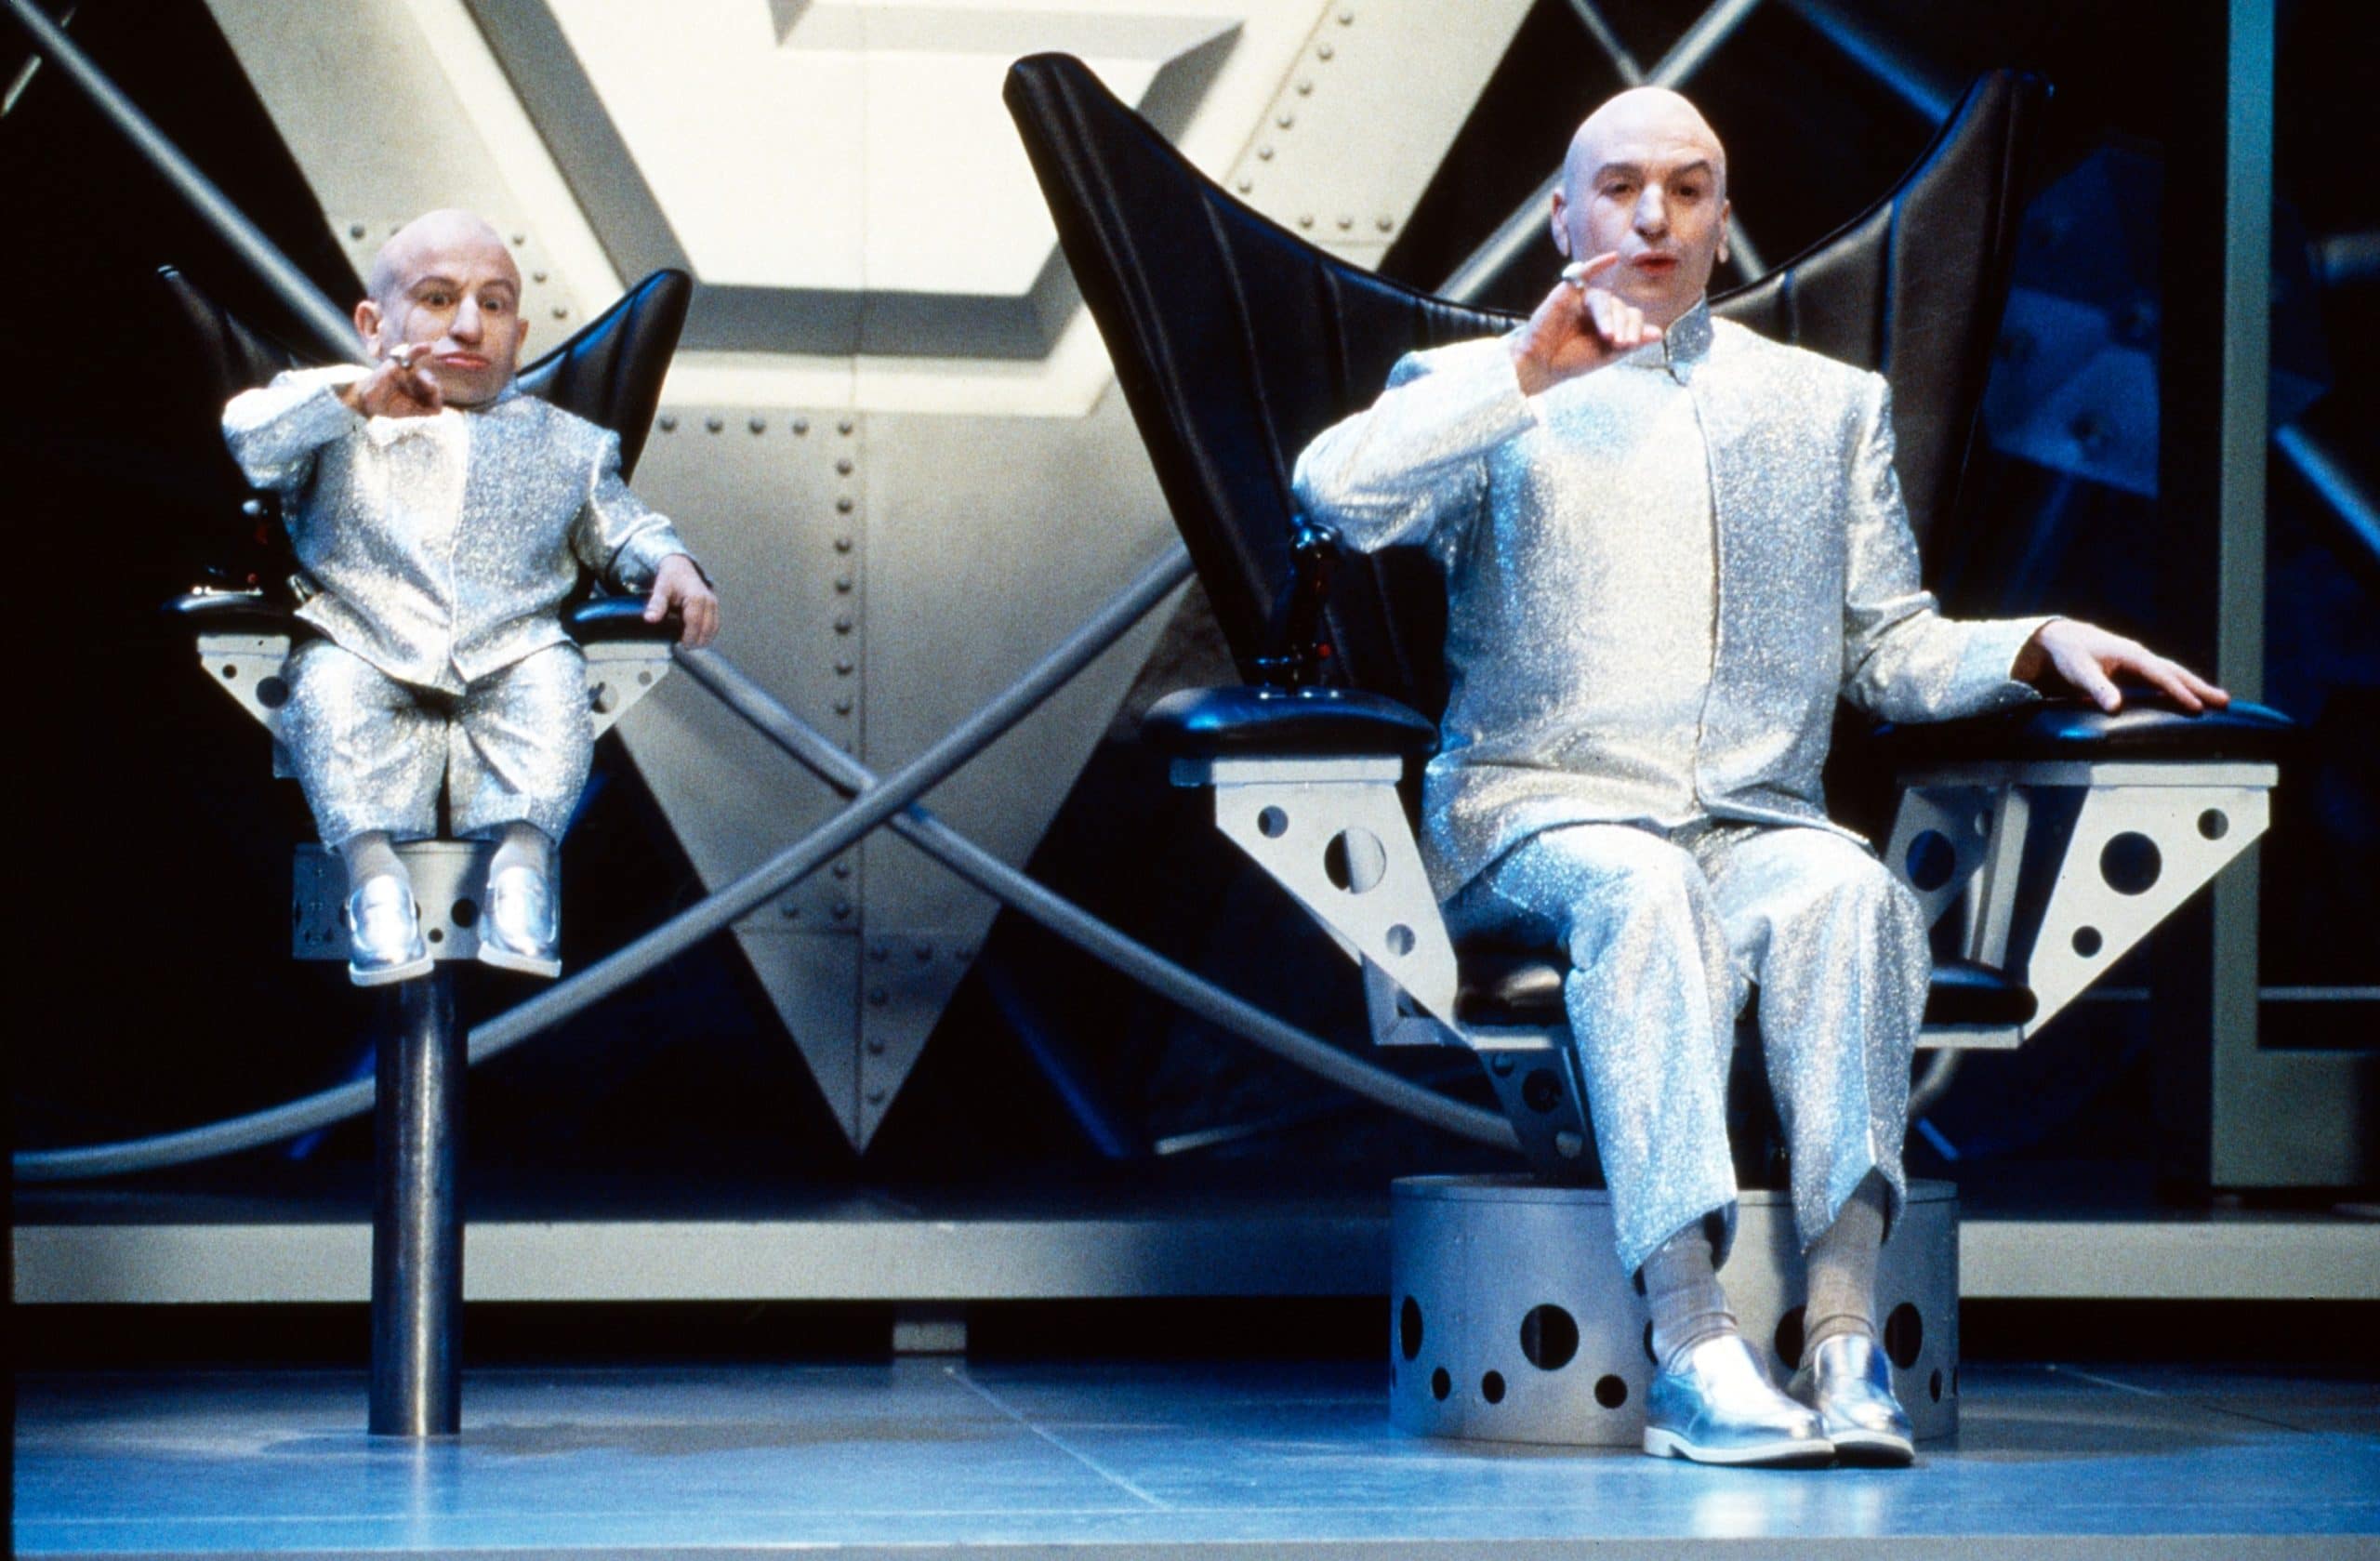 AUSTIN POWERS: THE SPY WHO SHAGGED ME, from left: Verne Troyer, Mike Myers, 1999